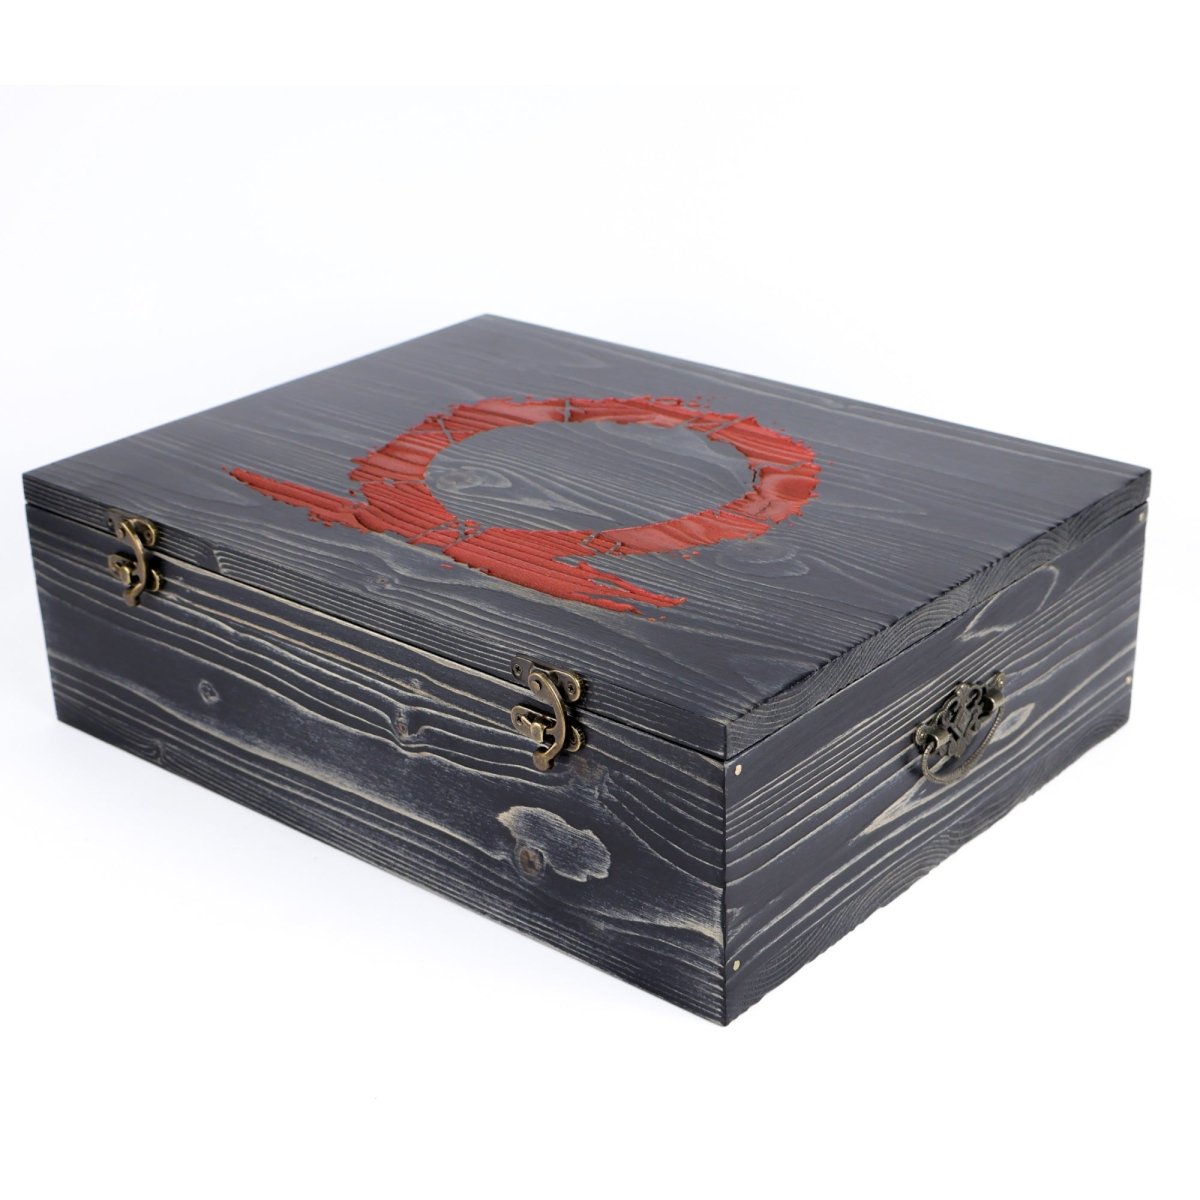 Wooden box for Mjolnir hammer with red God of War logo from AncientSmithy